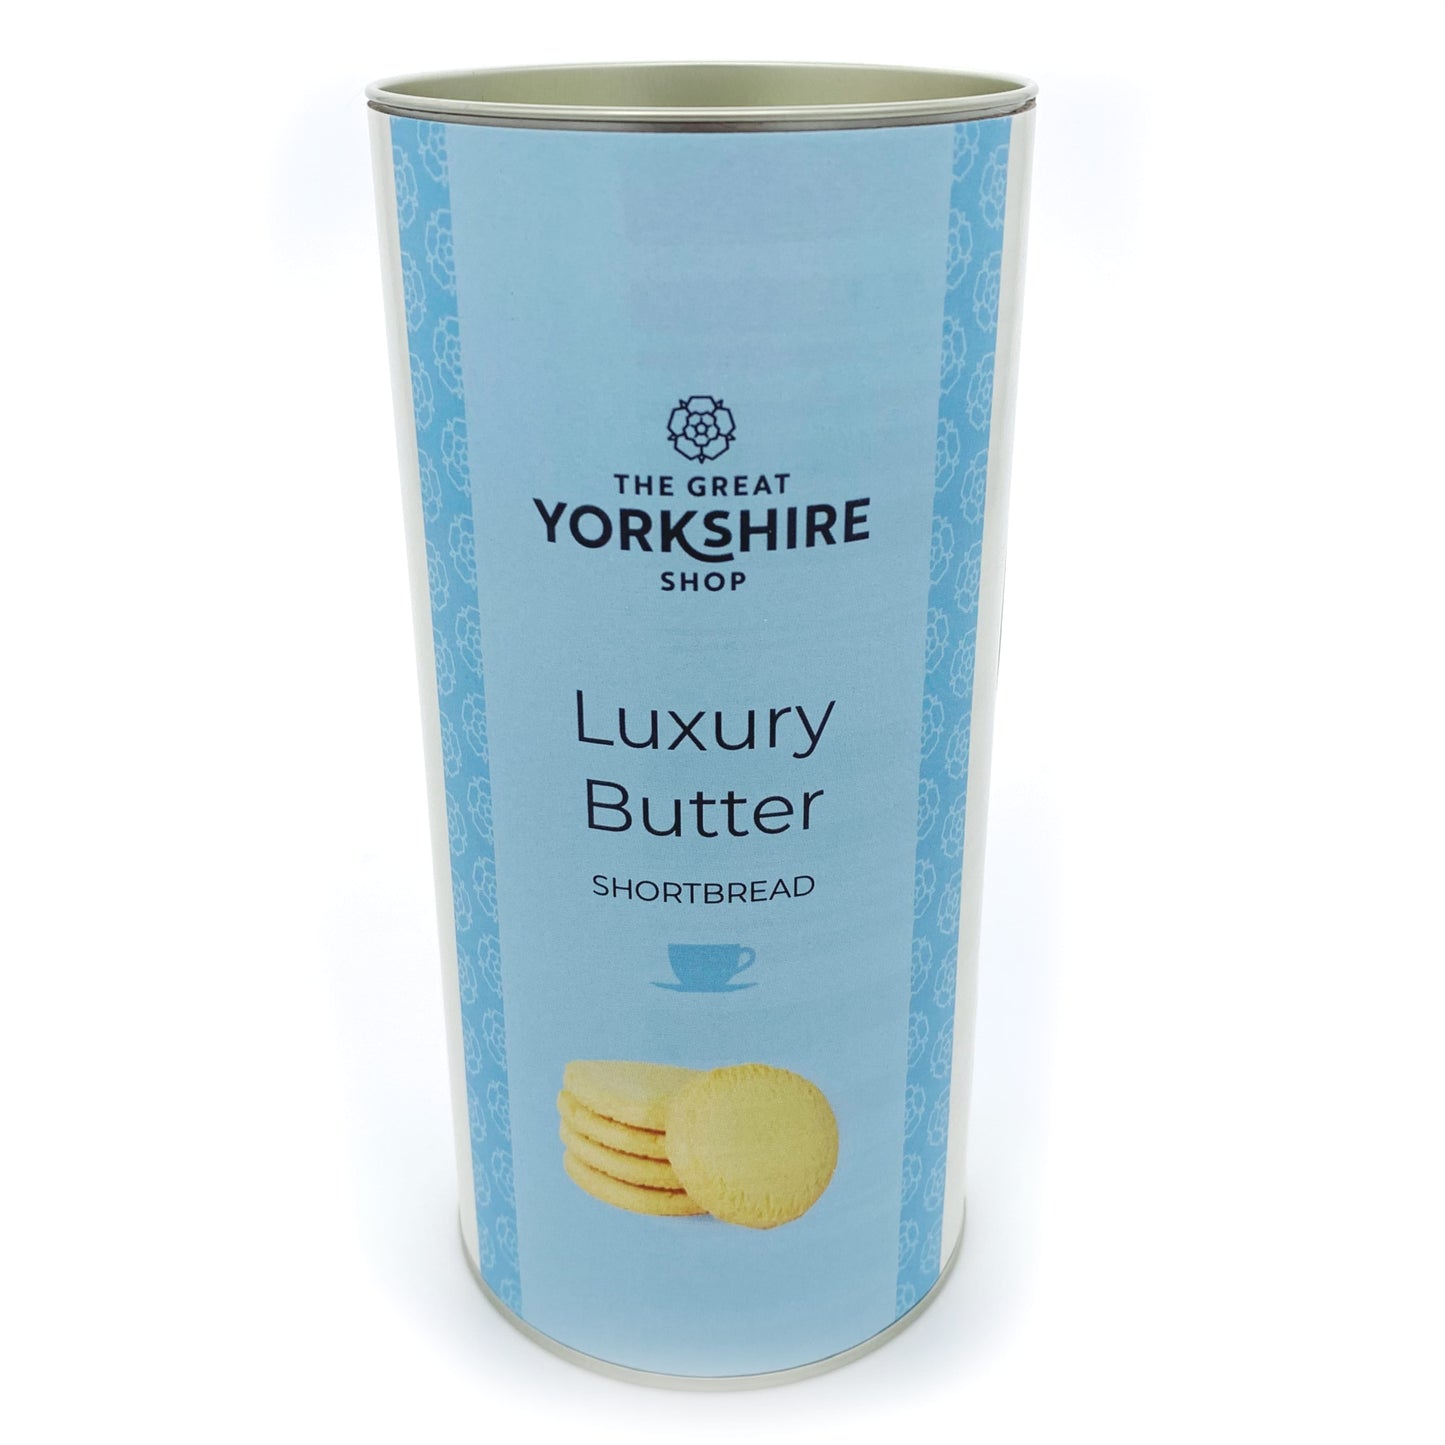 Luxury Butter Shortbread Biscuits - The Great Yorkshire Shop